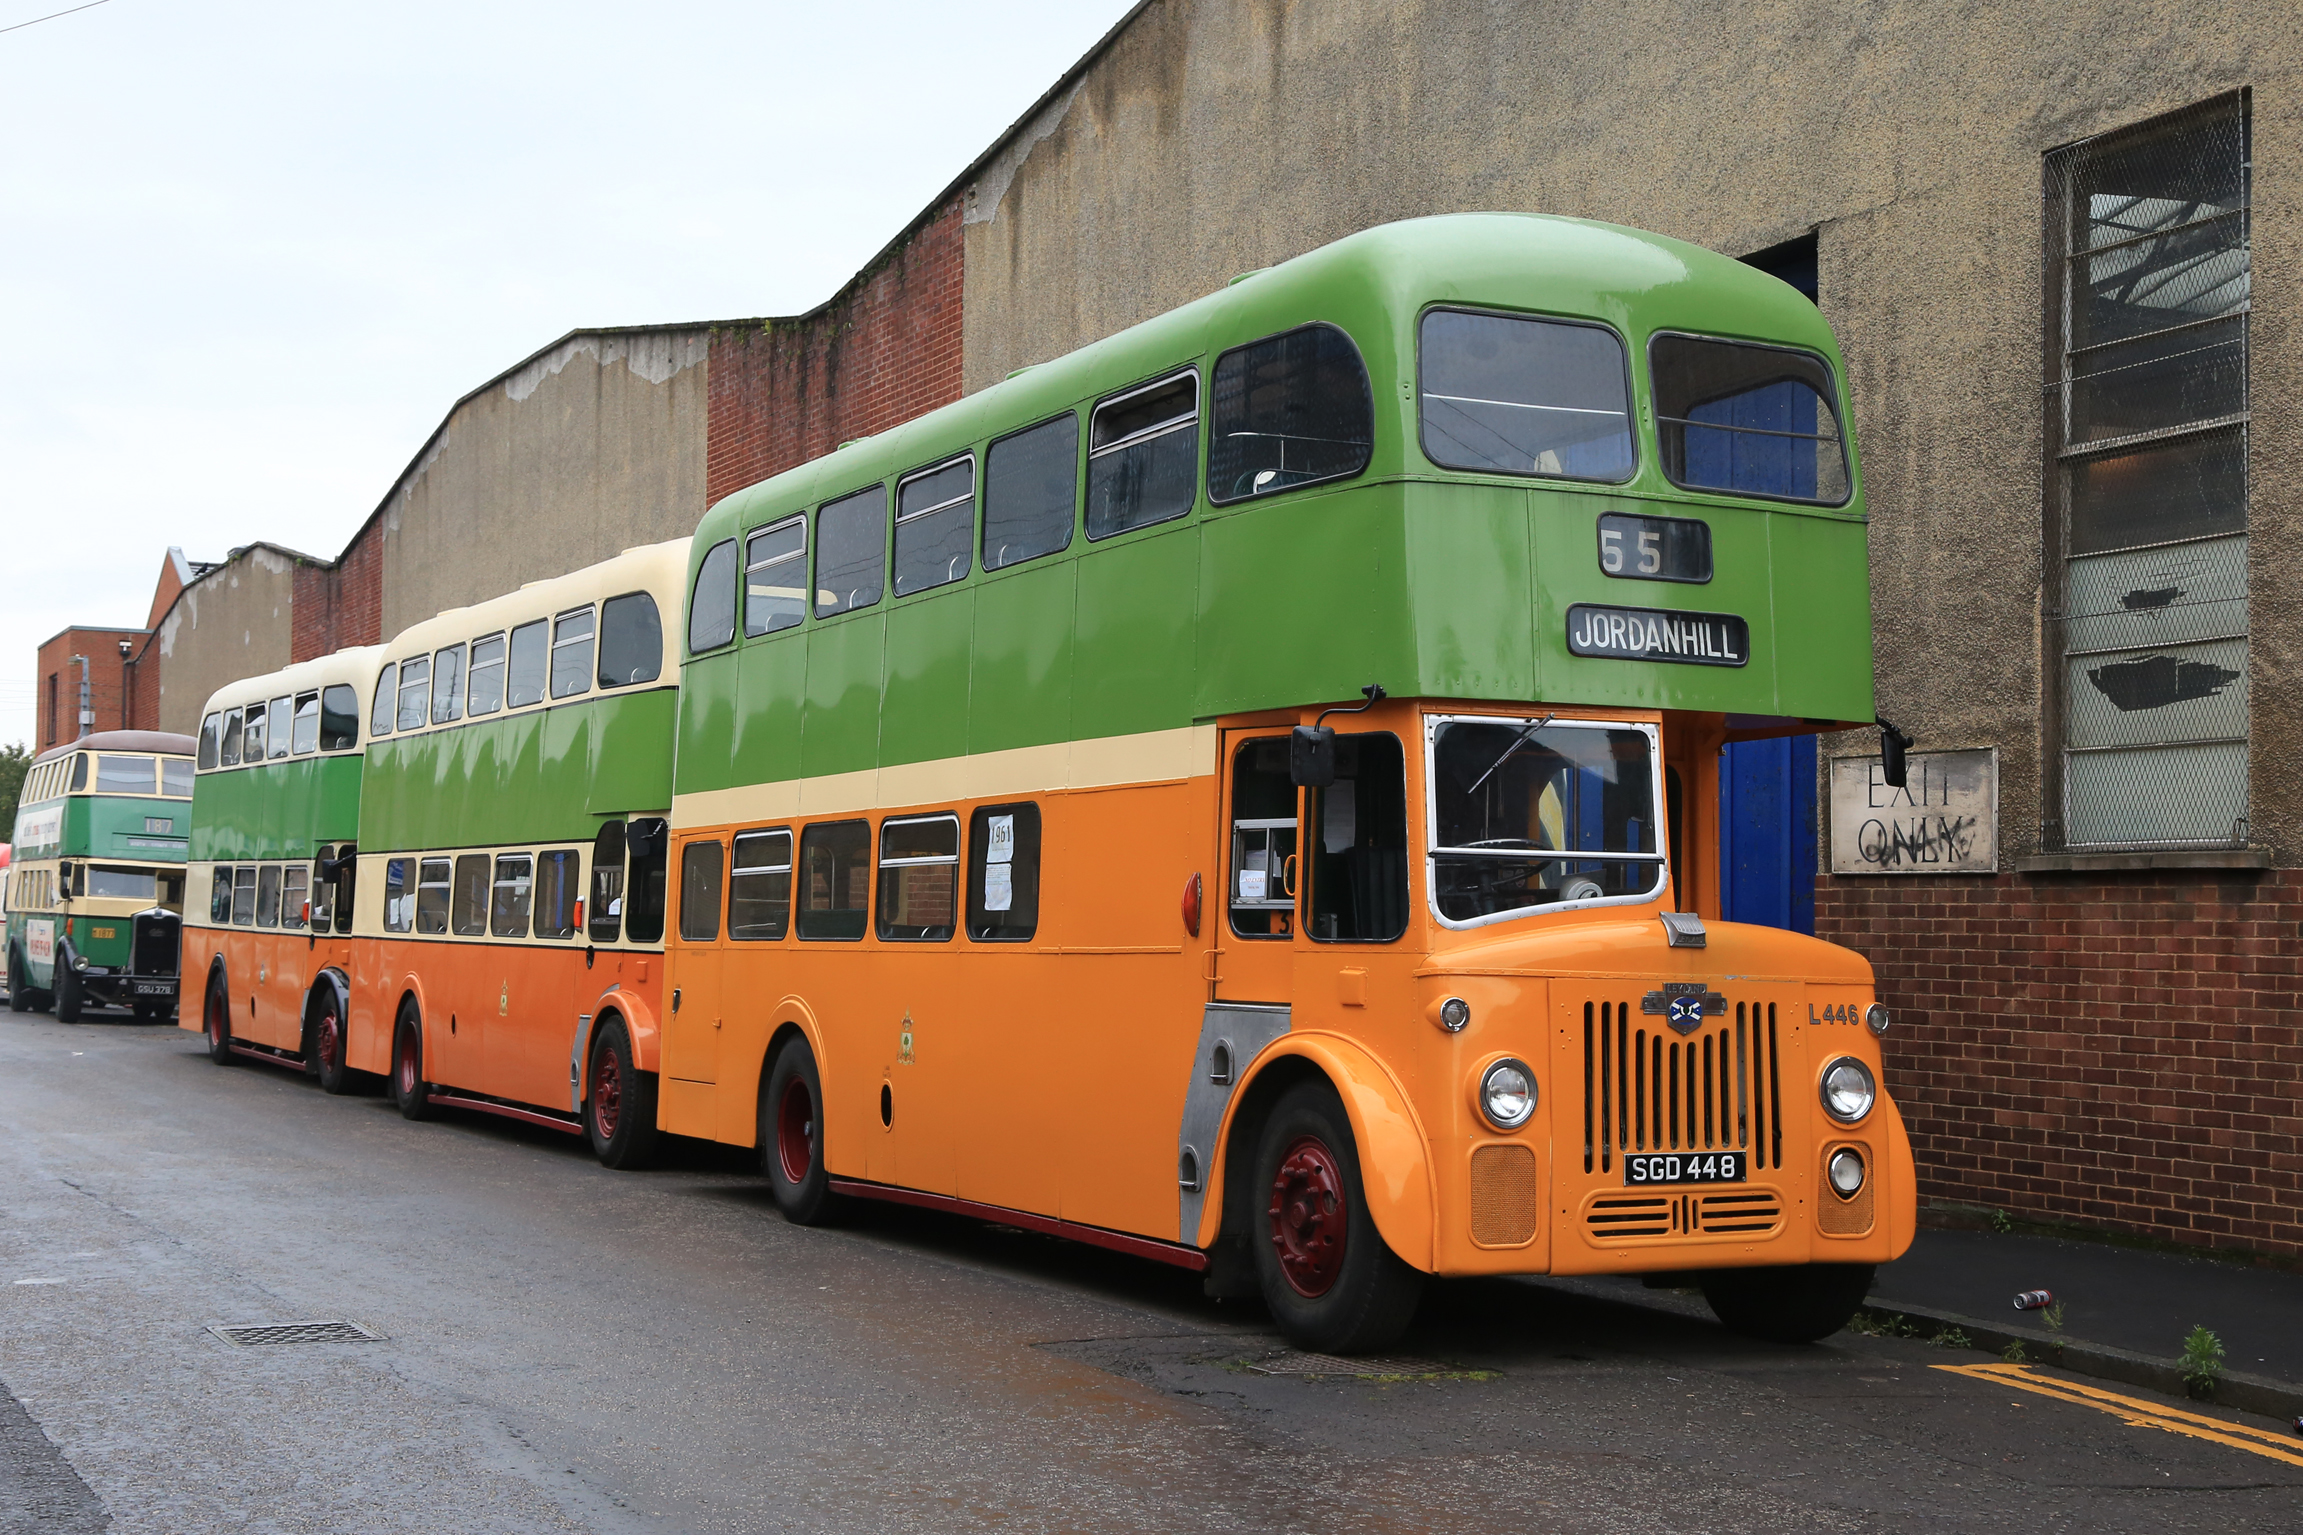 Prior to opening on the Saturday morning, three Glasgow Corporation double-deckers line up outside the museum, led by a 1960 Leyland PD3